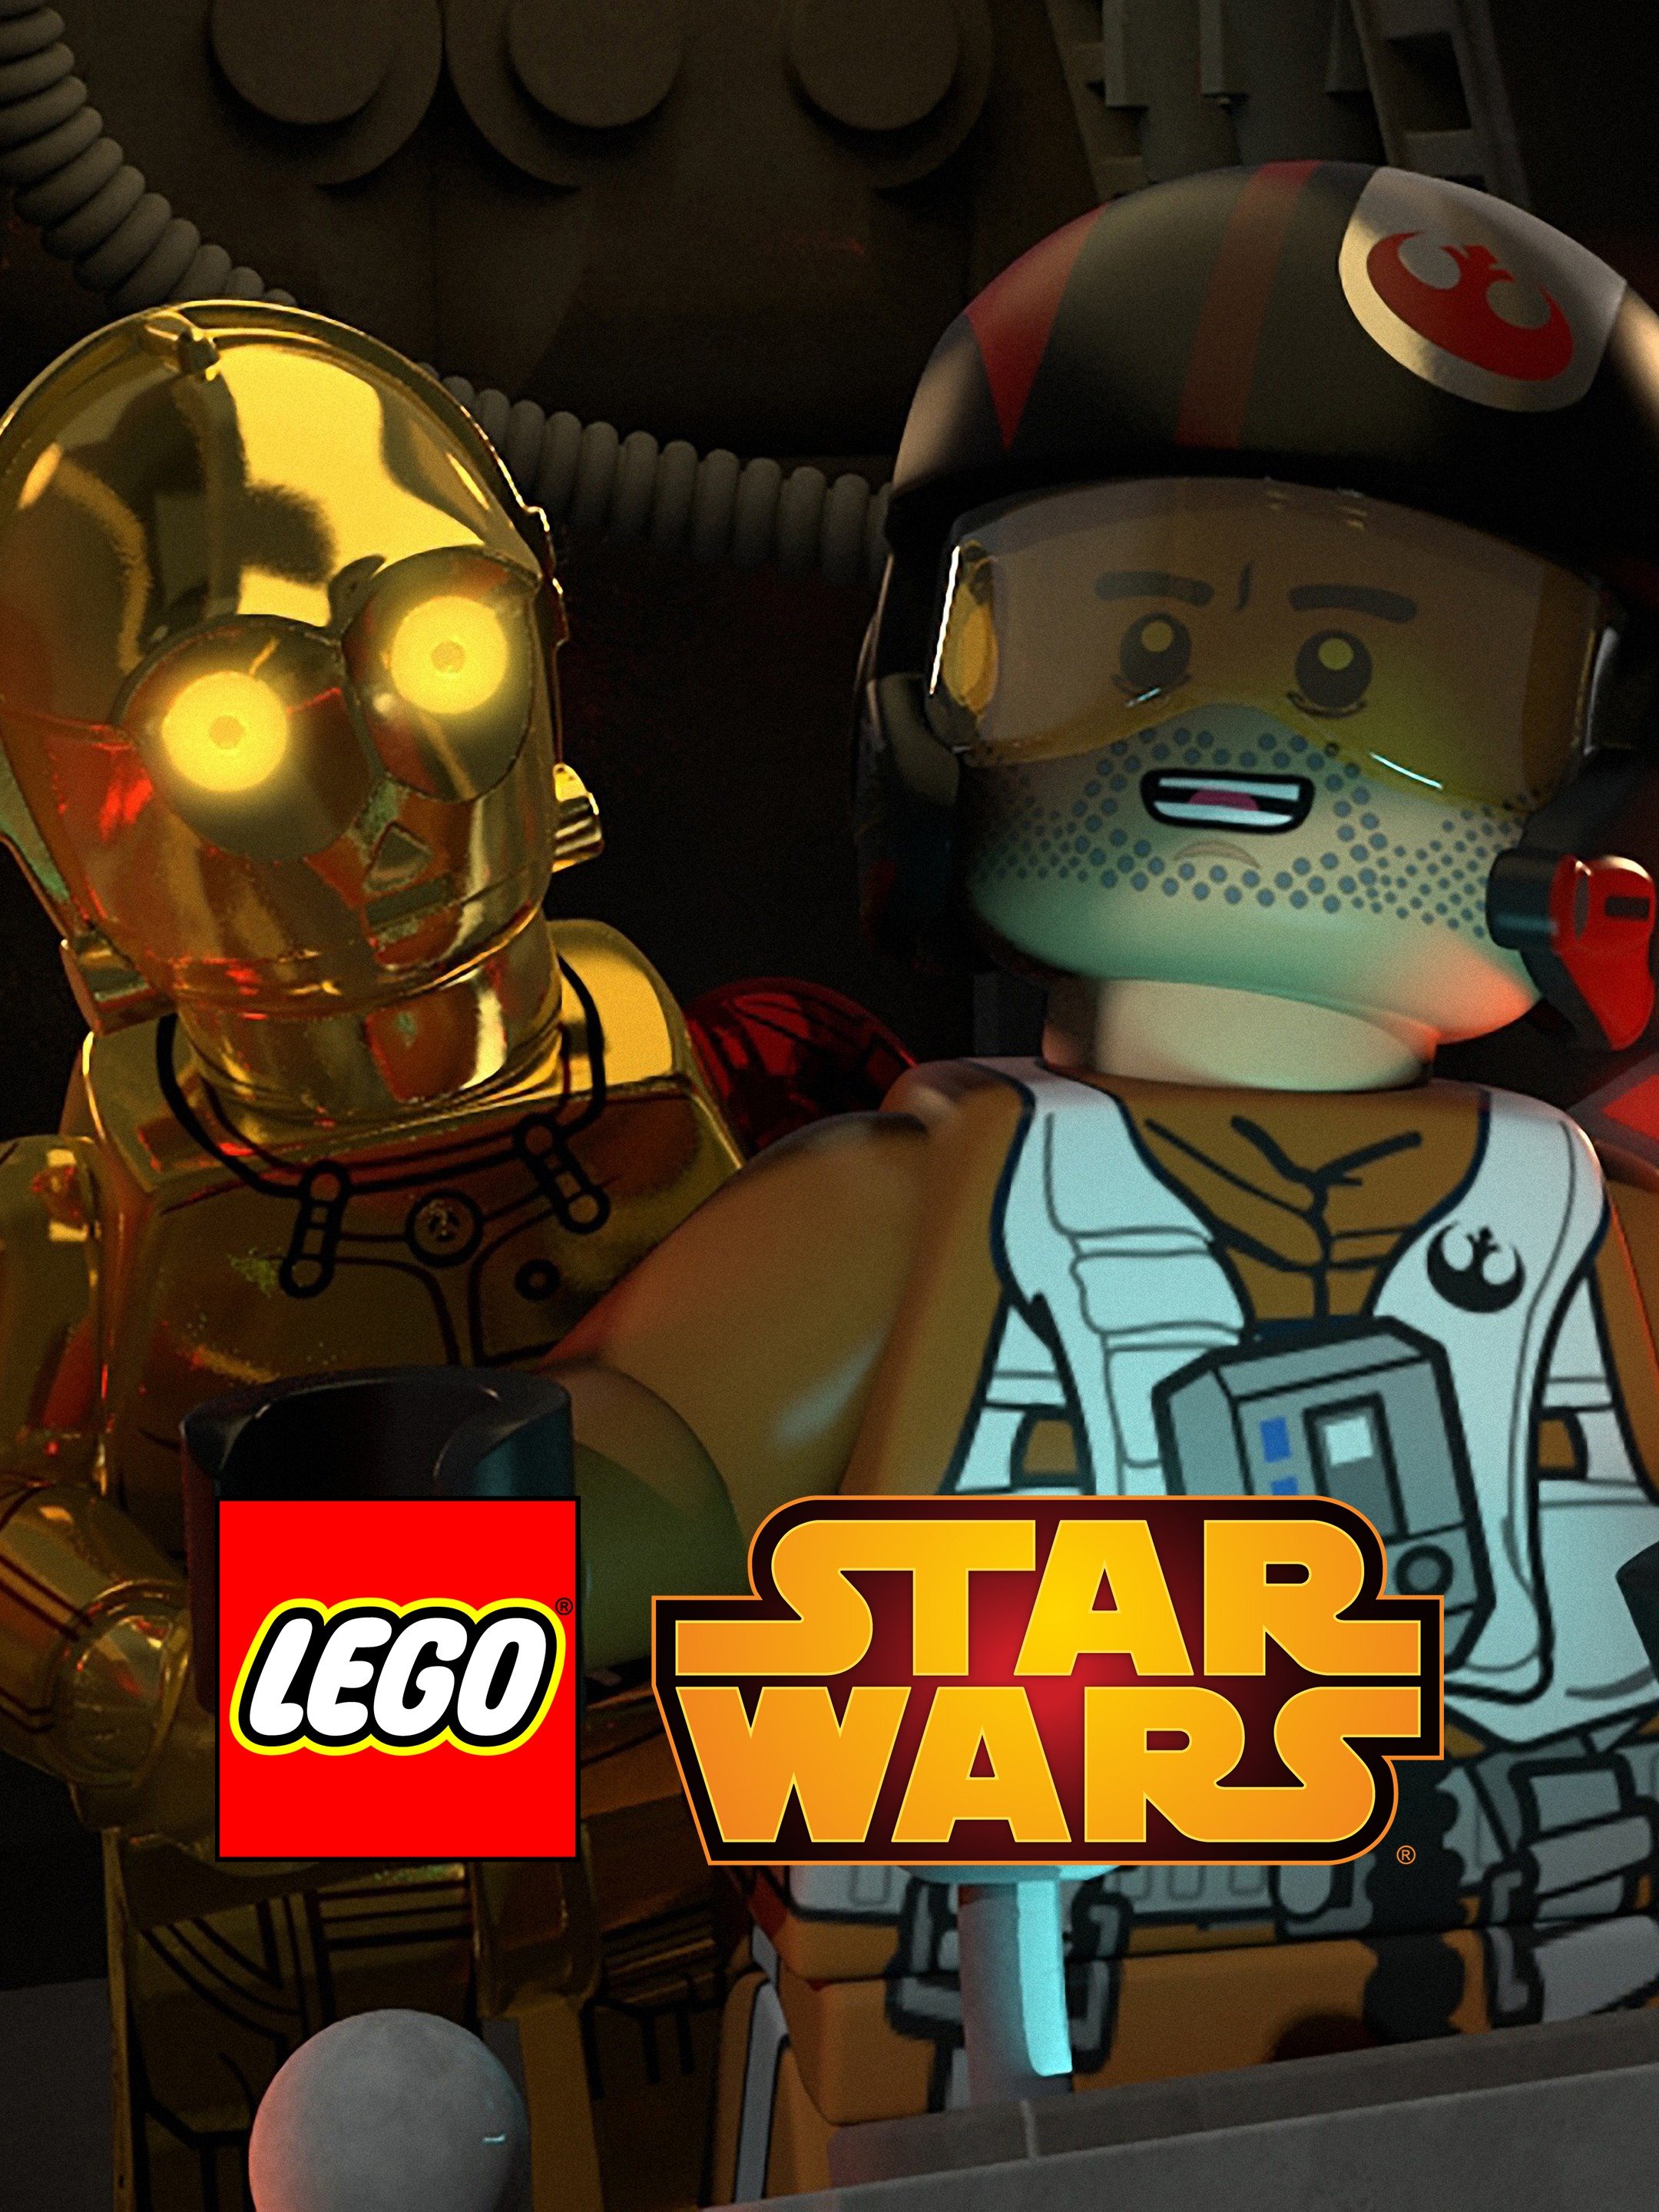 Lego Wars: The Resistance - Rotten Tomatoes